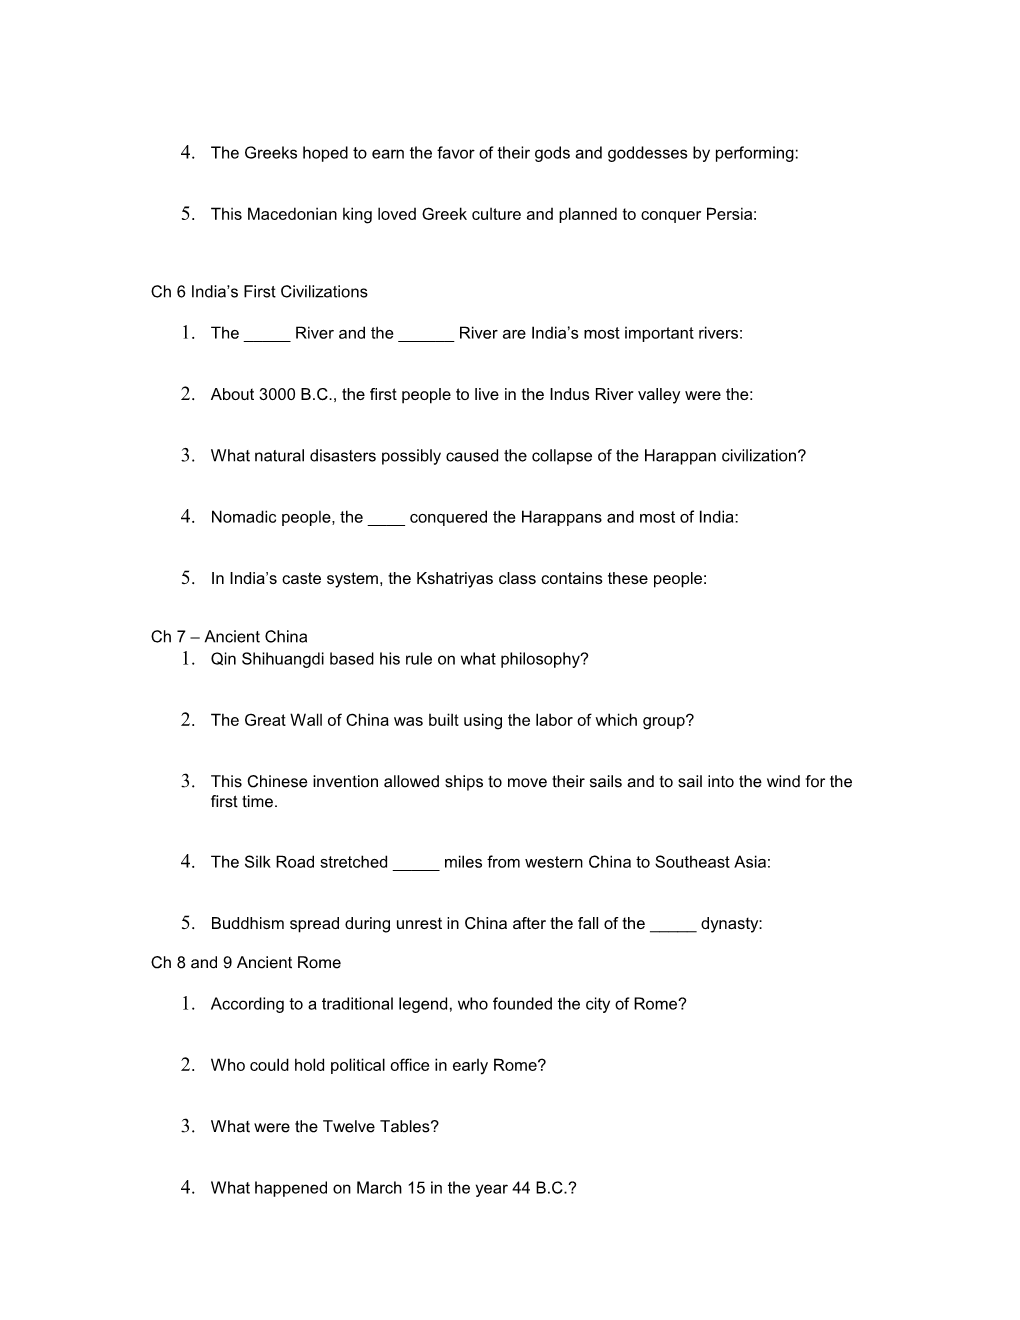 MSS SS JH 1 and JH 2 Chapter 2 Study Guide Quiz Green Group